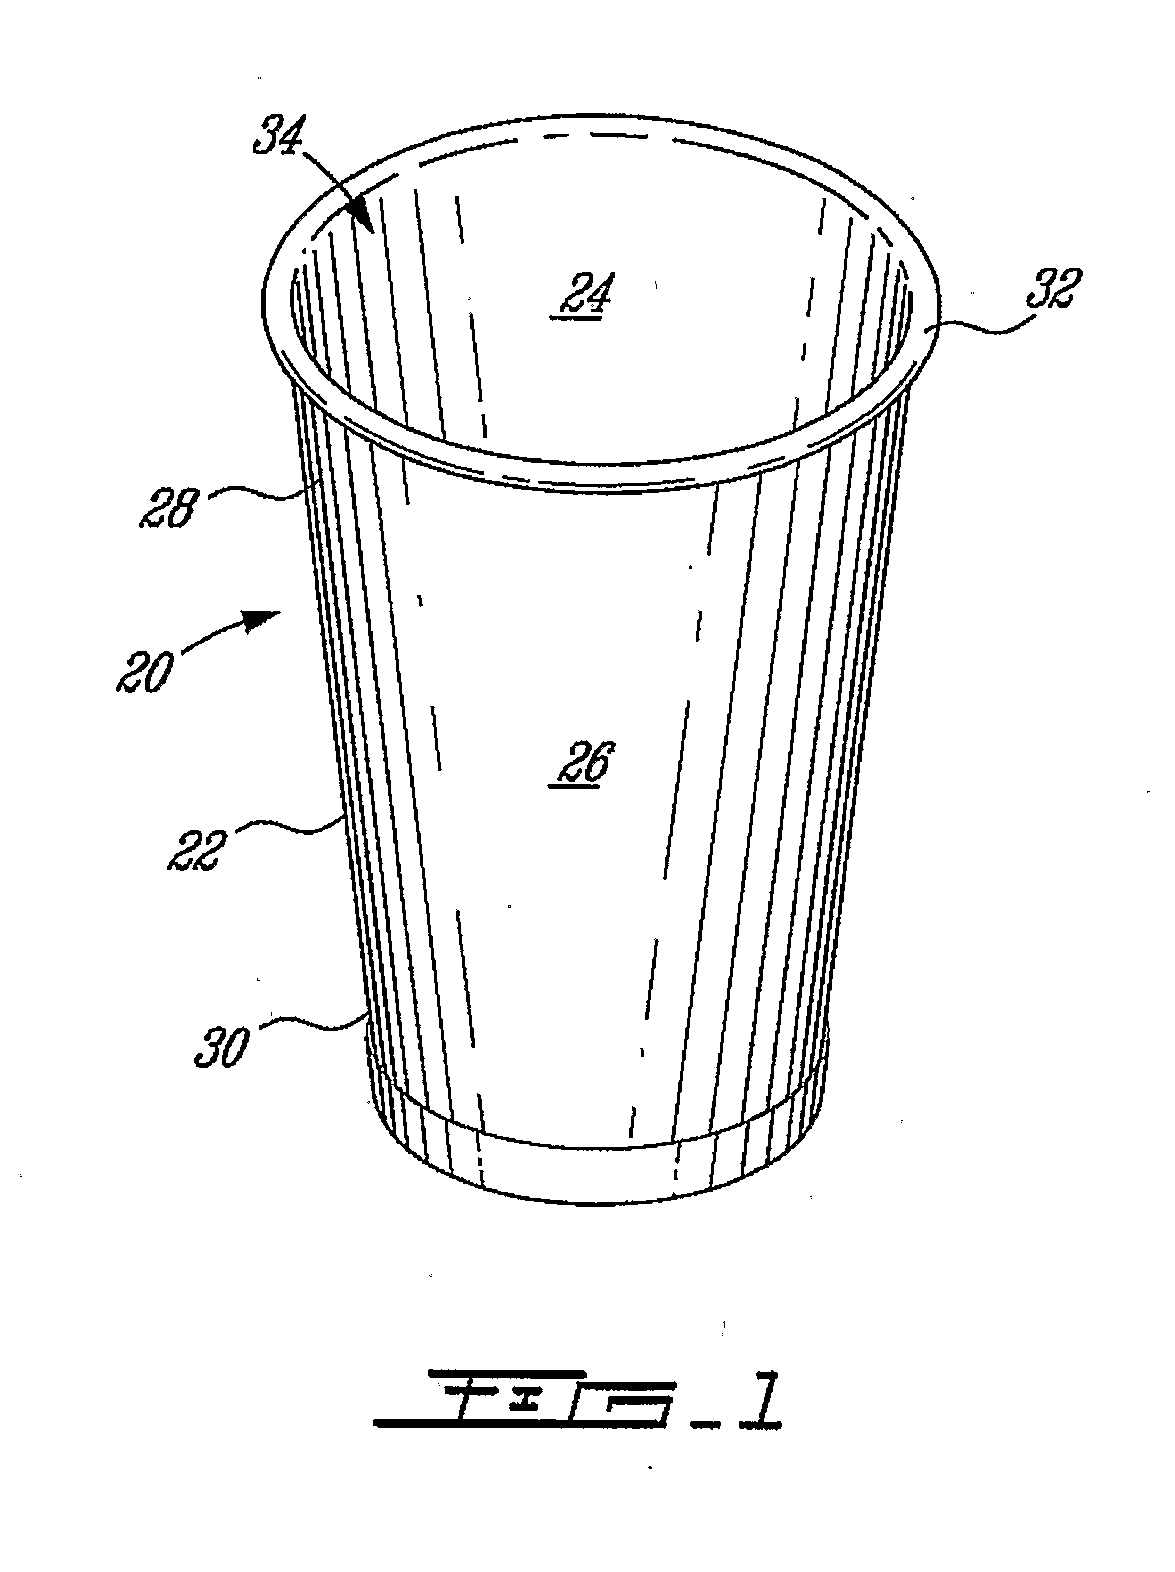 Steeping device for producing a liquid mixture